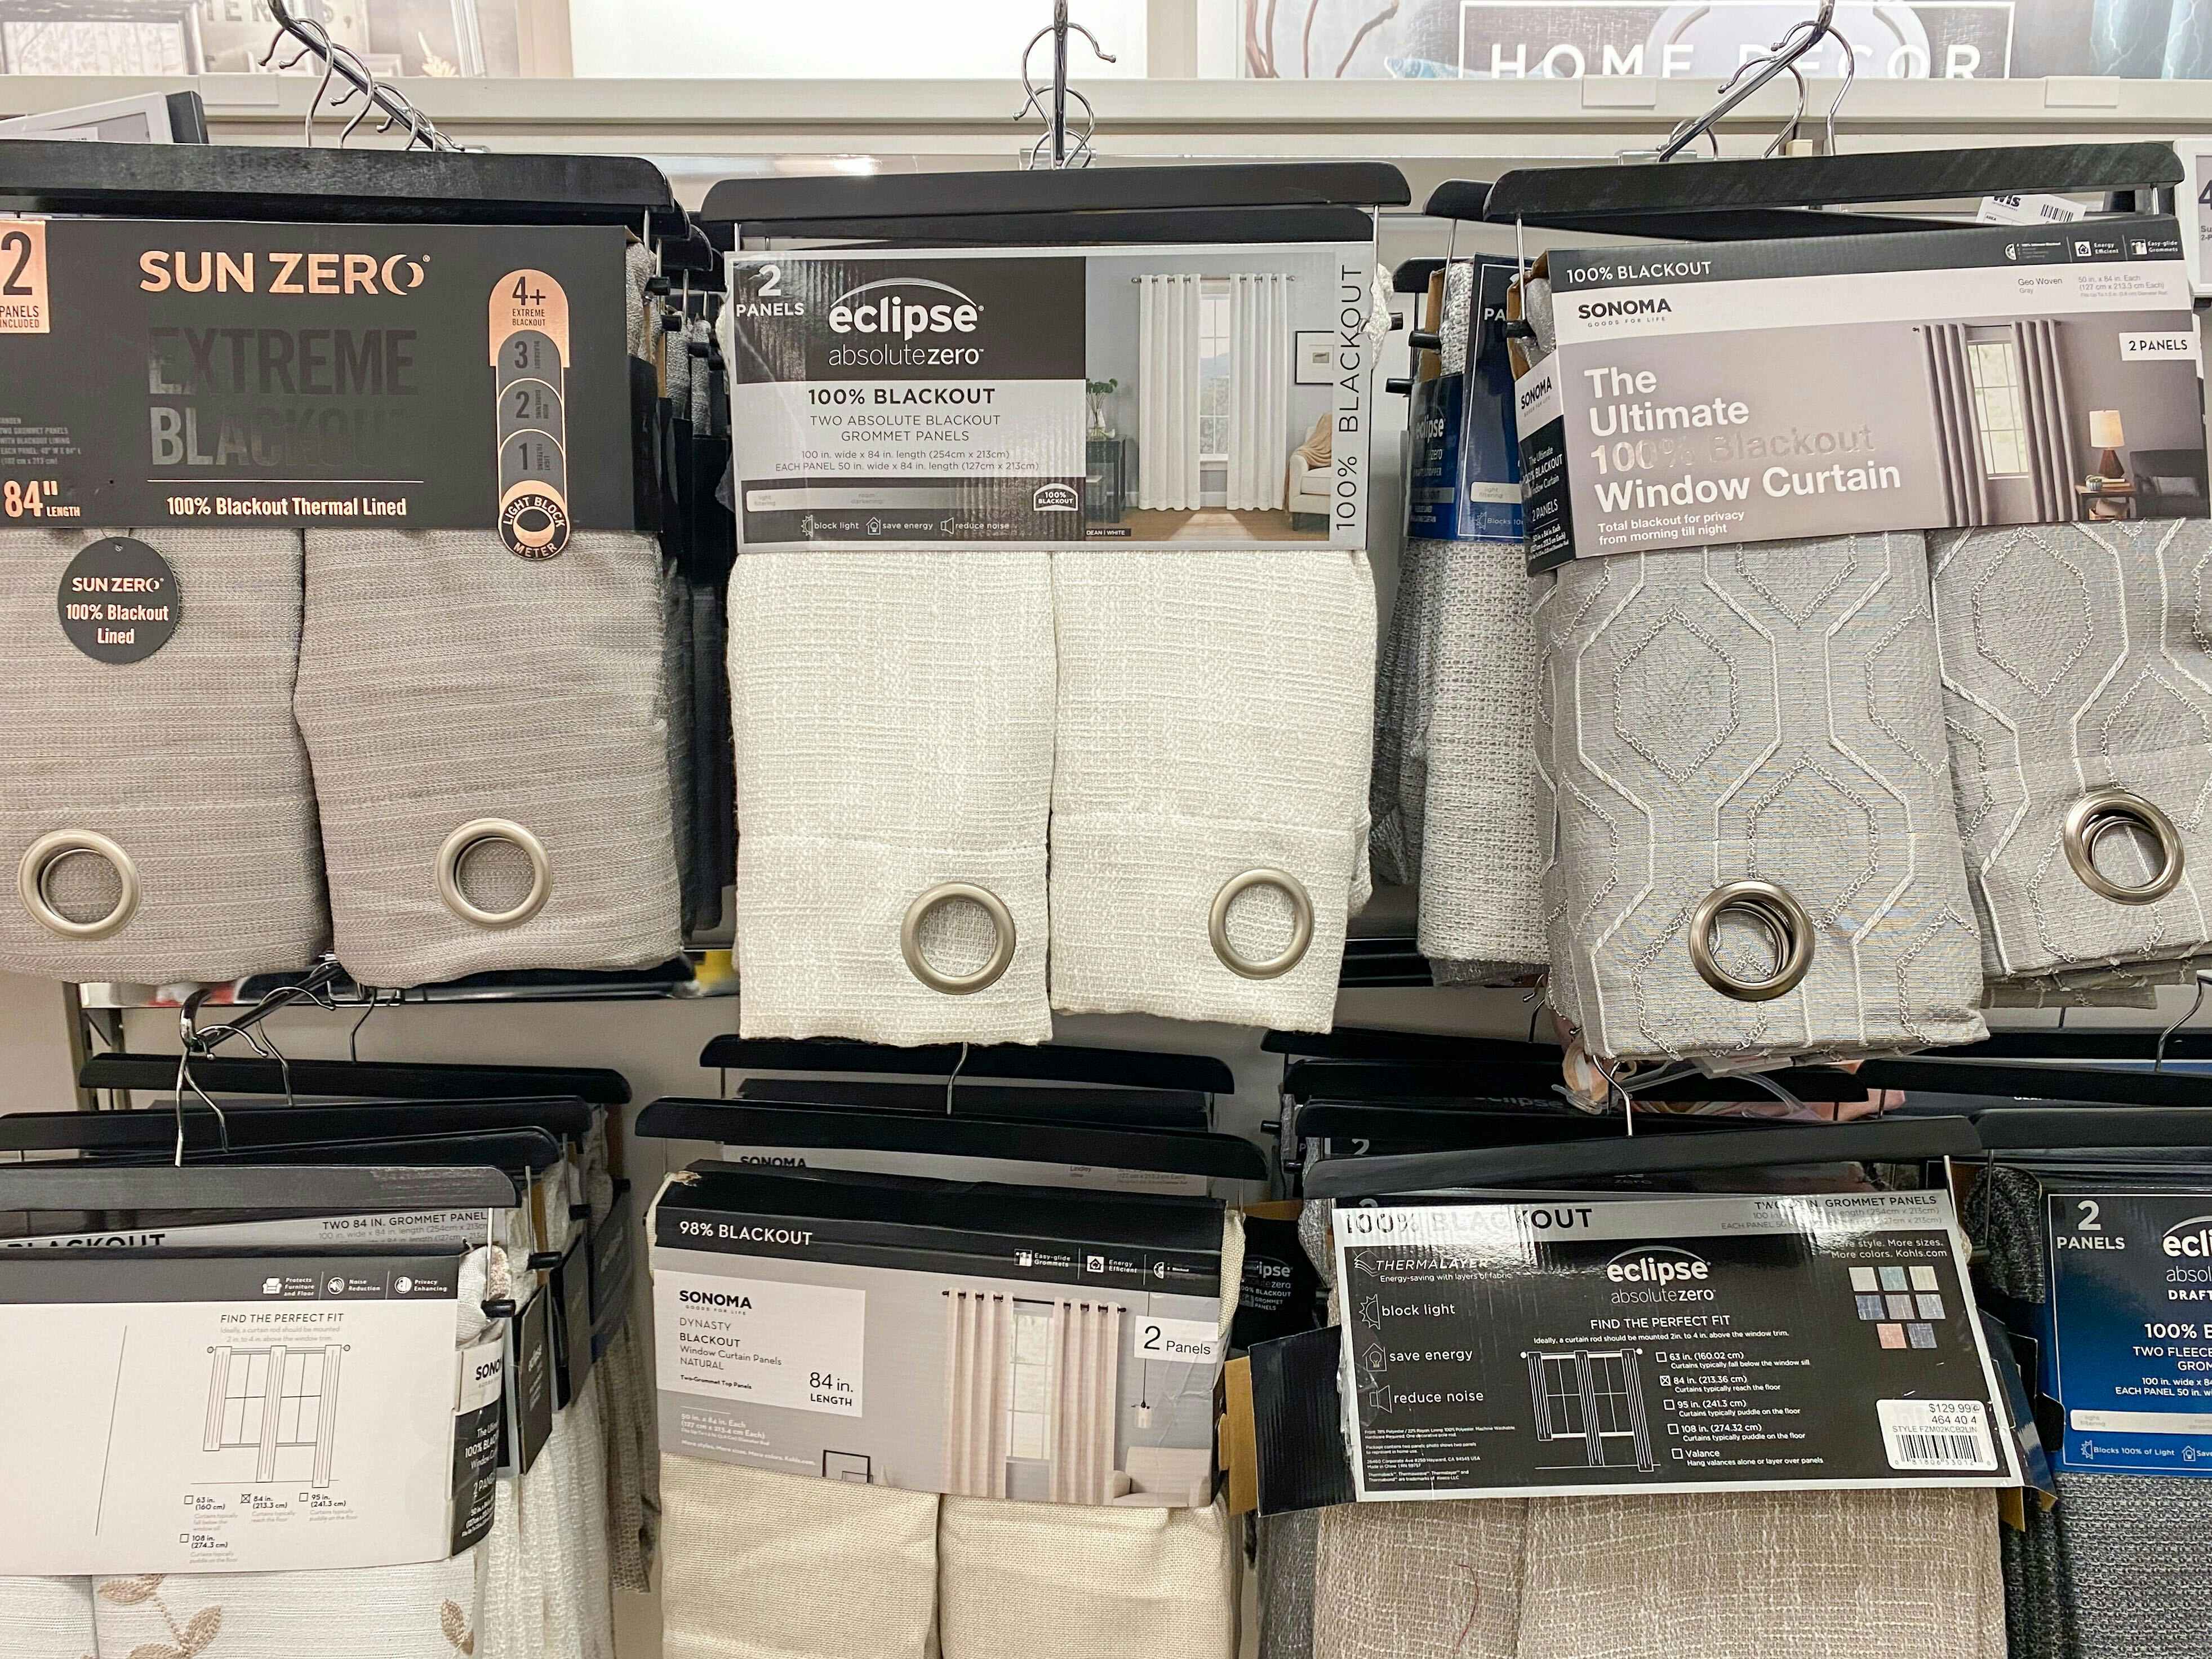 kohls blackout curtains in store image 2022_from_ios